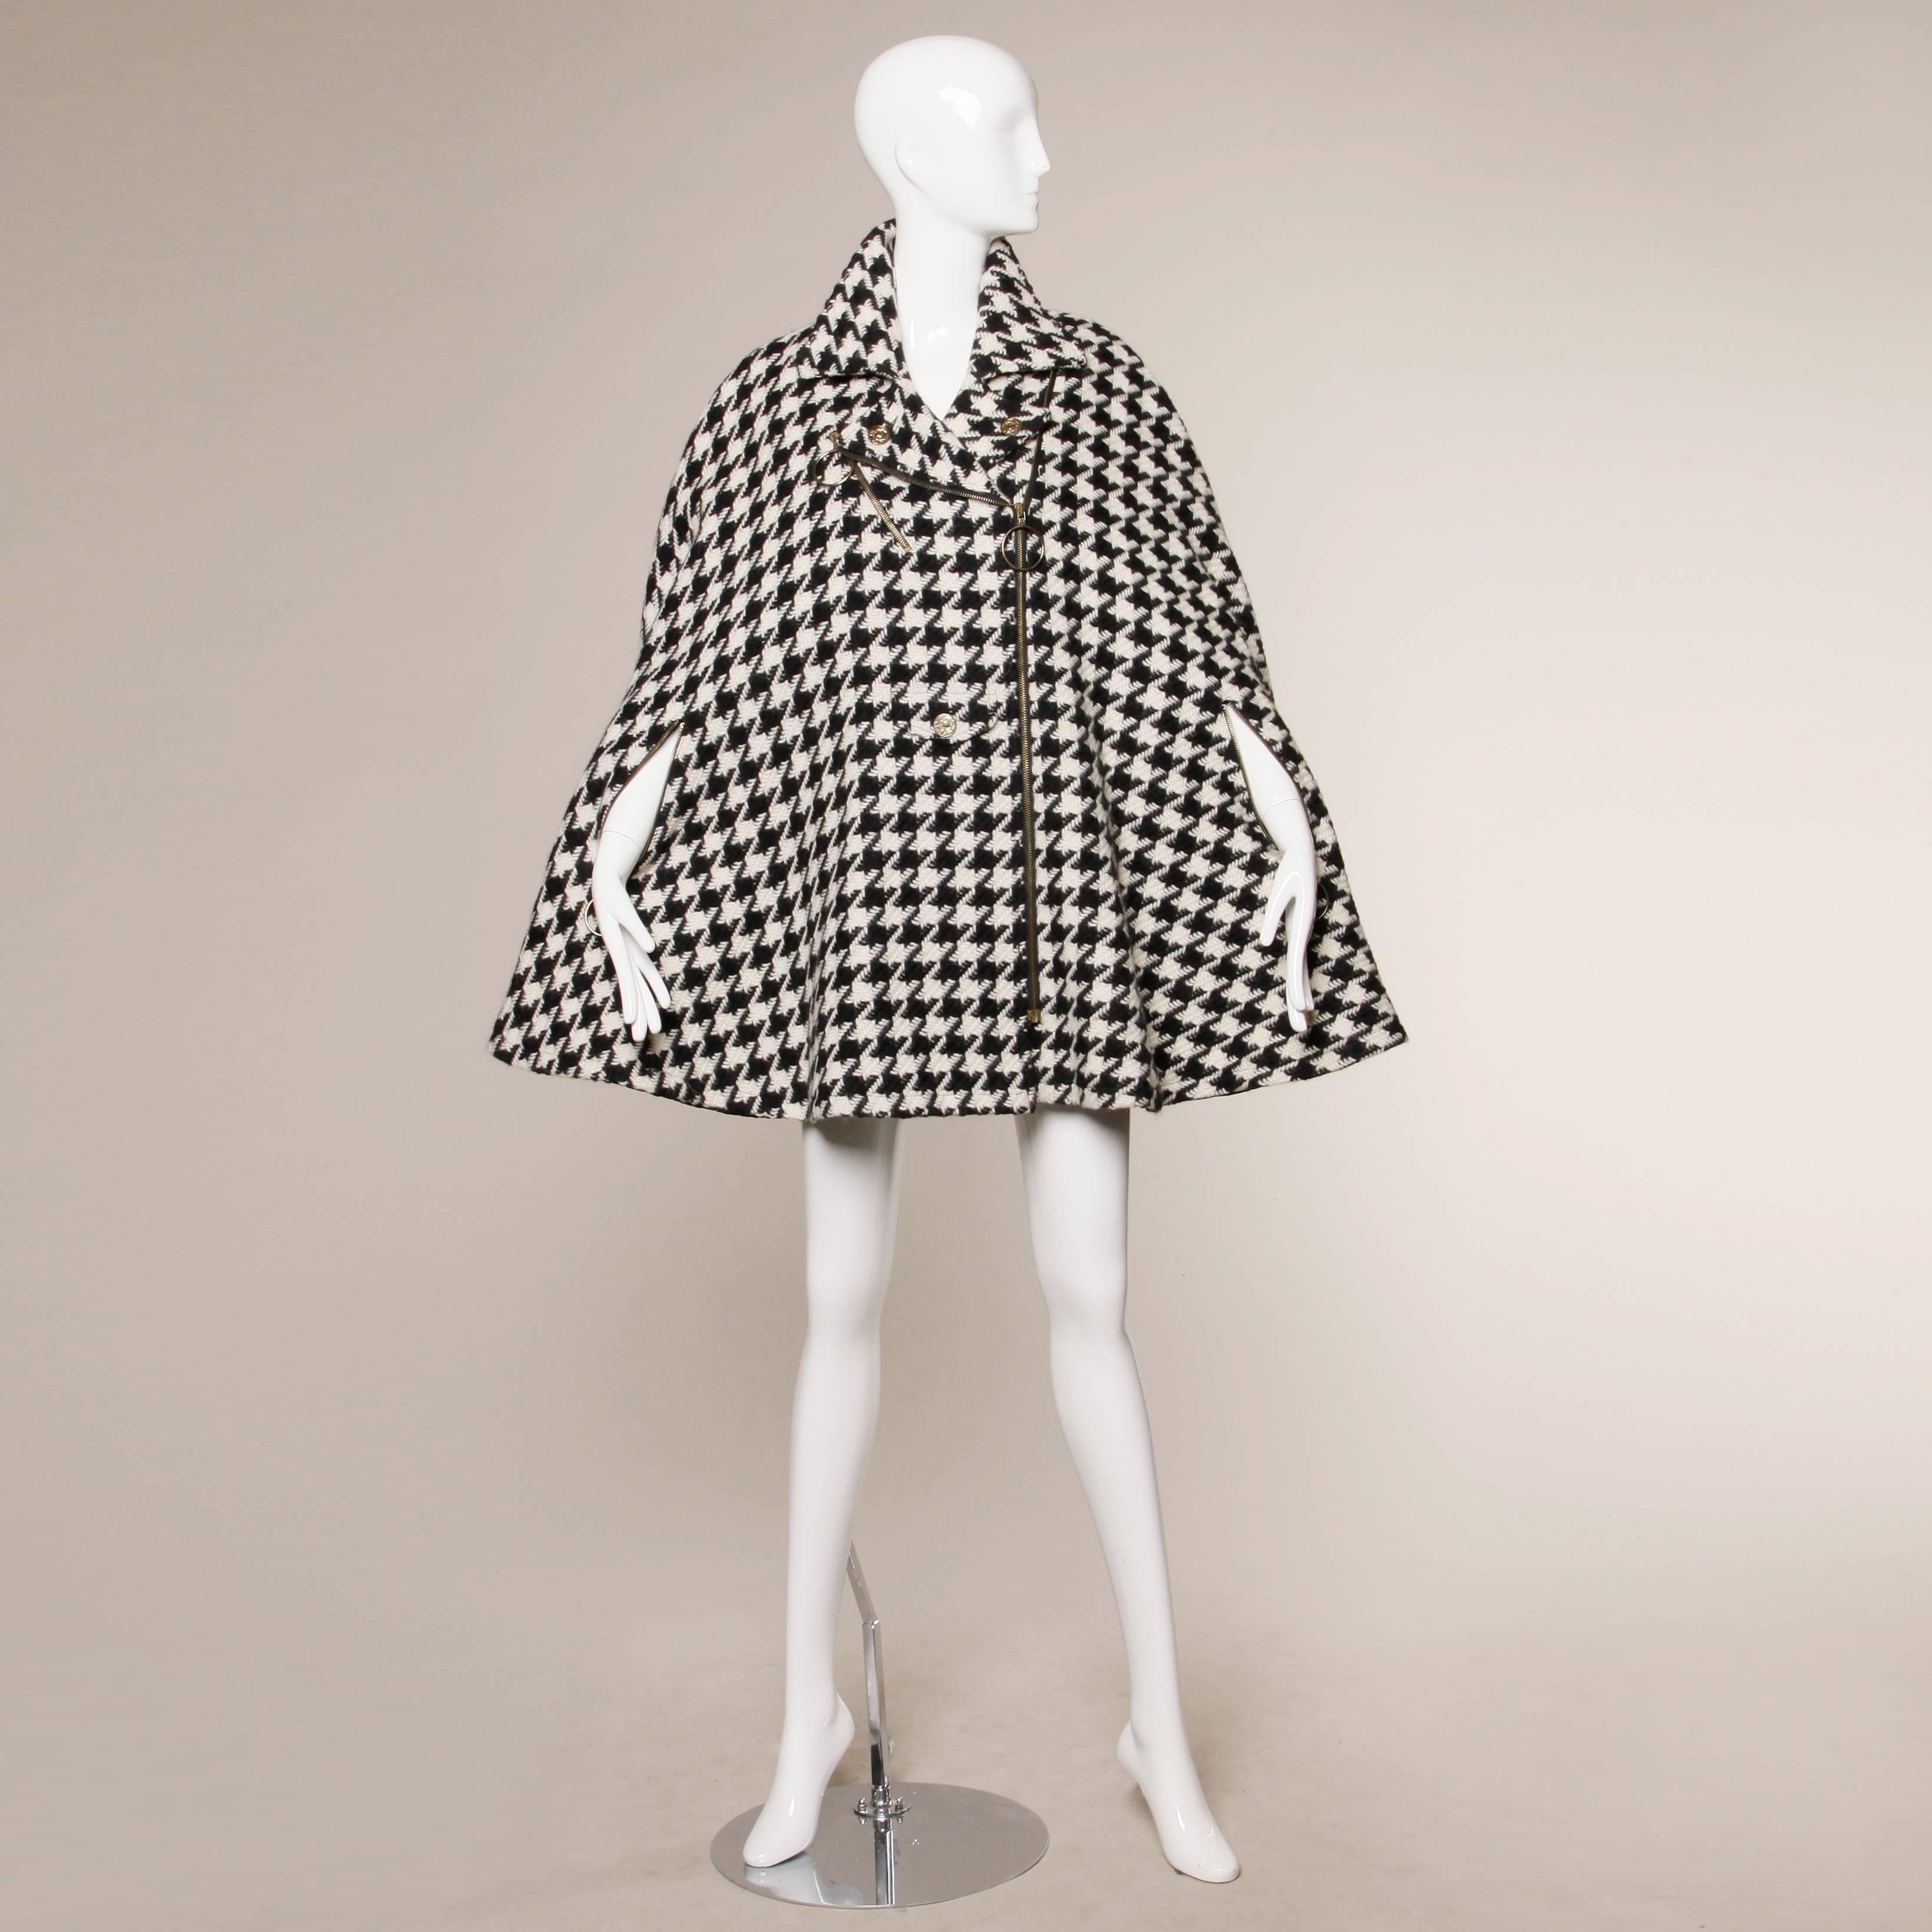 Gorgeous heavy black and off white houndstooth cape coat with Cheap & Chic heart buttons, zippered arm slits with jump ring pulls and quilted lining. Fabric content is 50% mohair 50% wool. The cape zips up the front and has a structured collar.